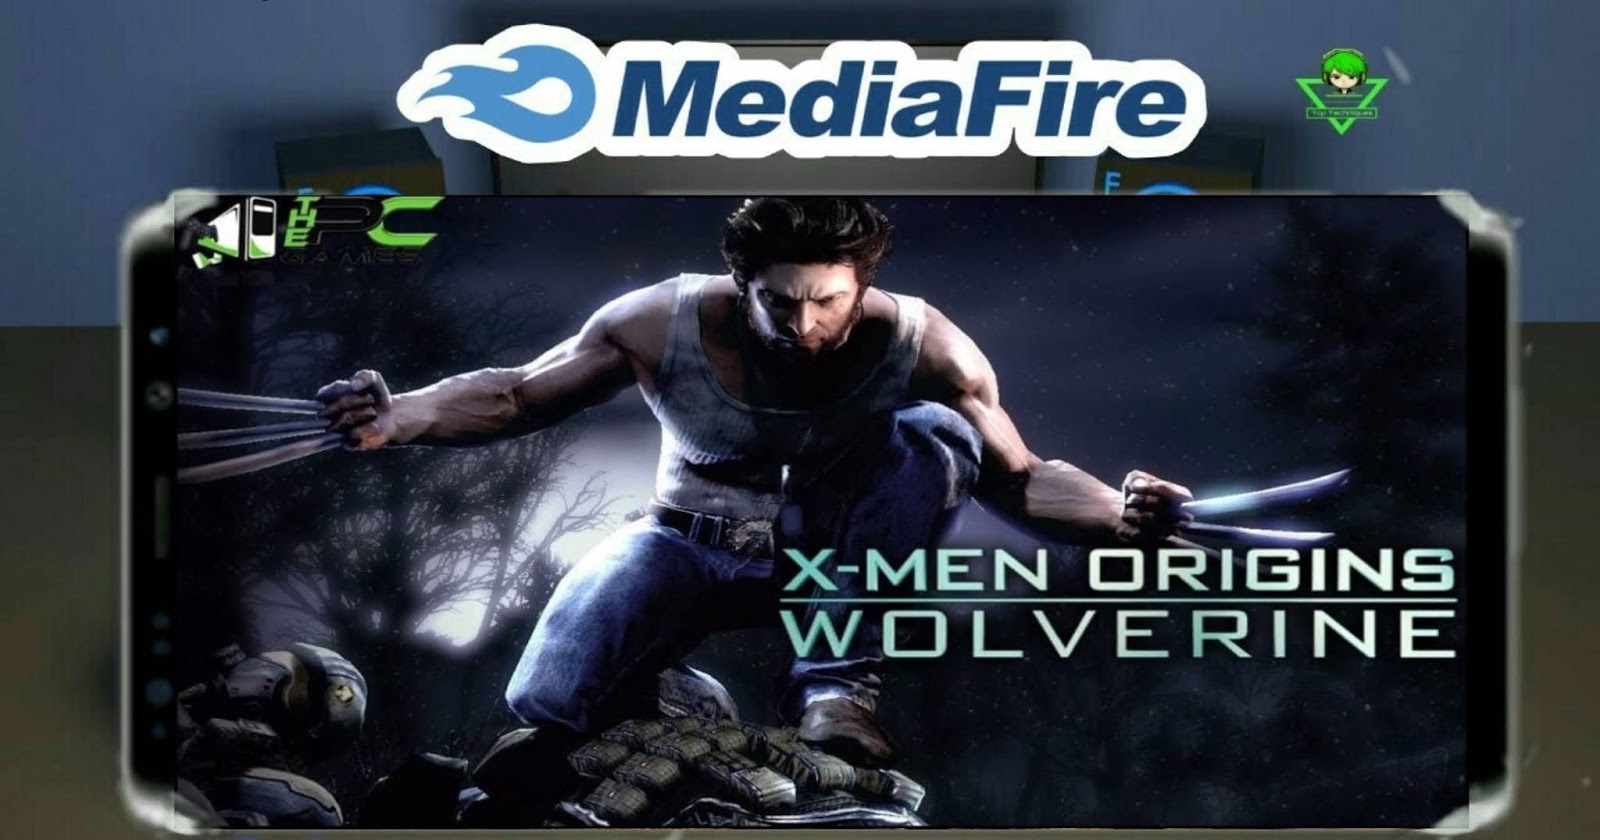 How To Get X-Men Wolverine For Free On Any Android 2020